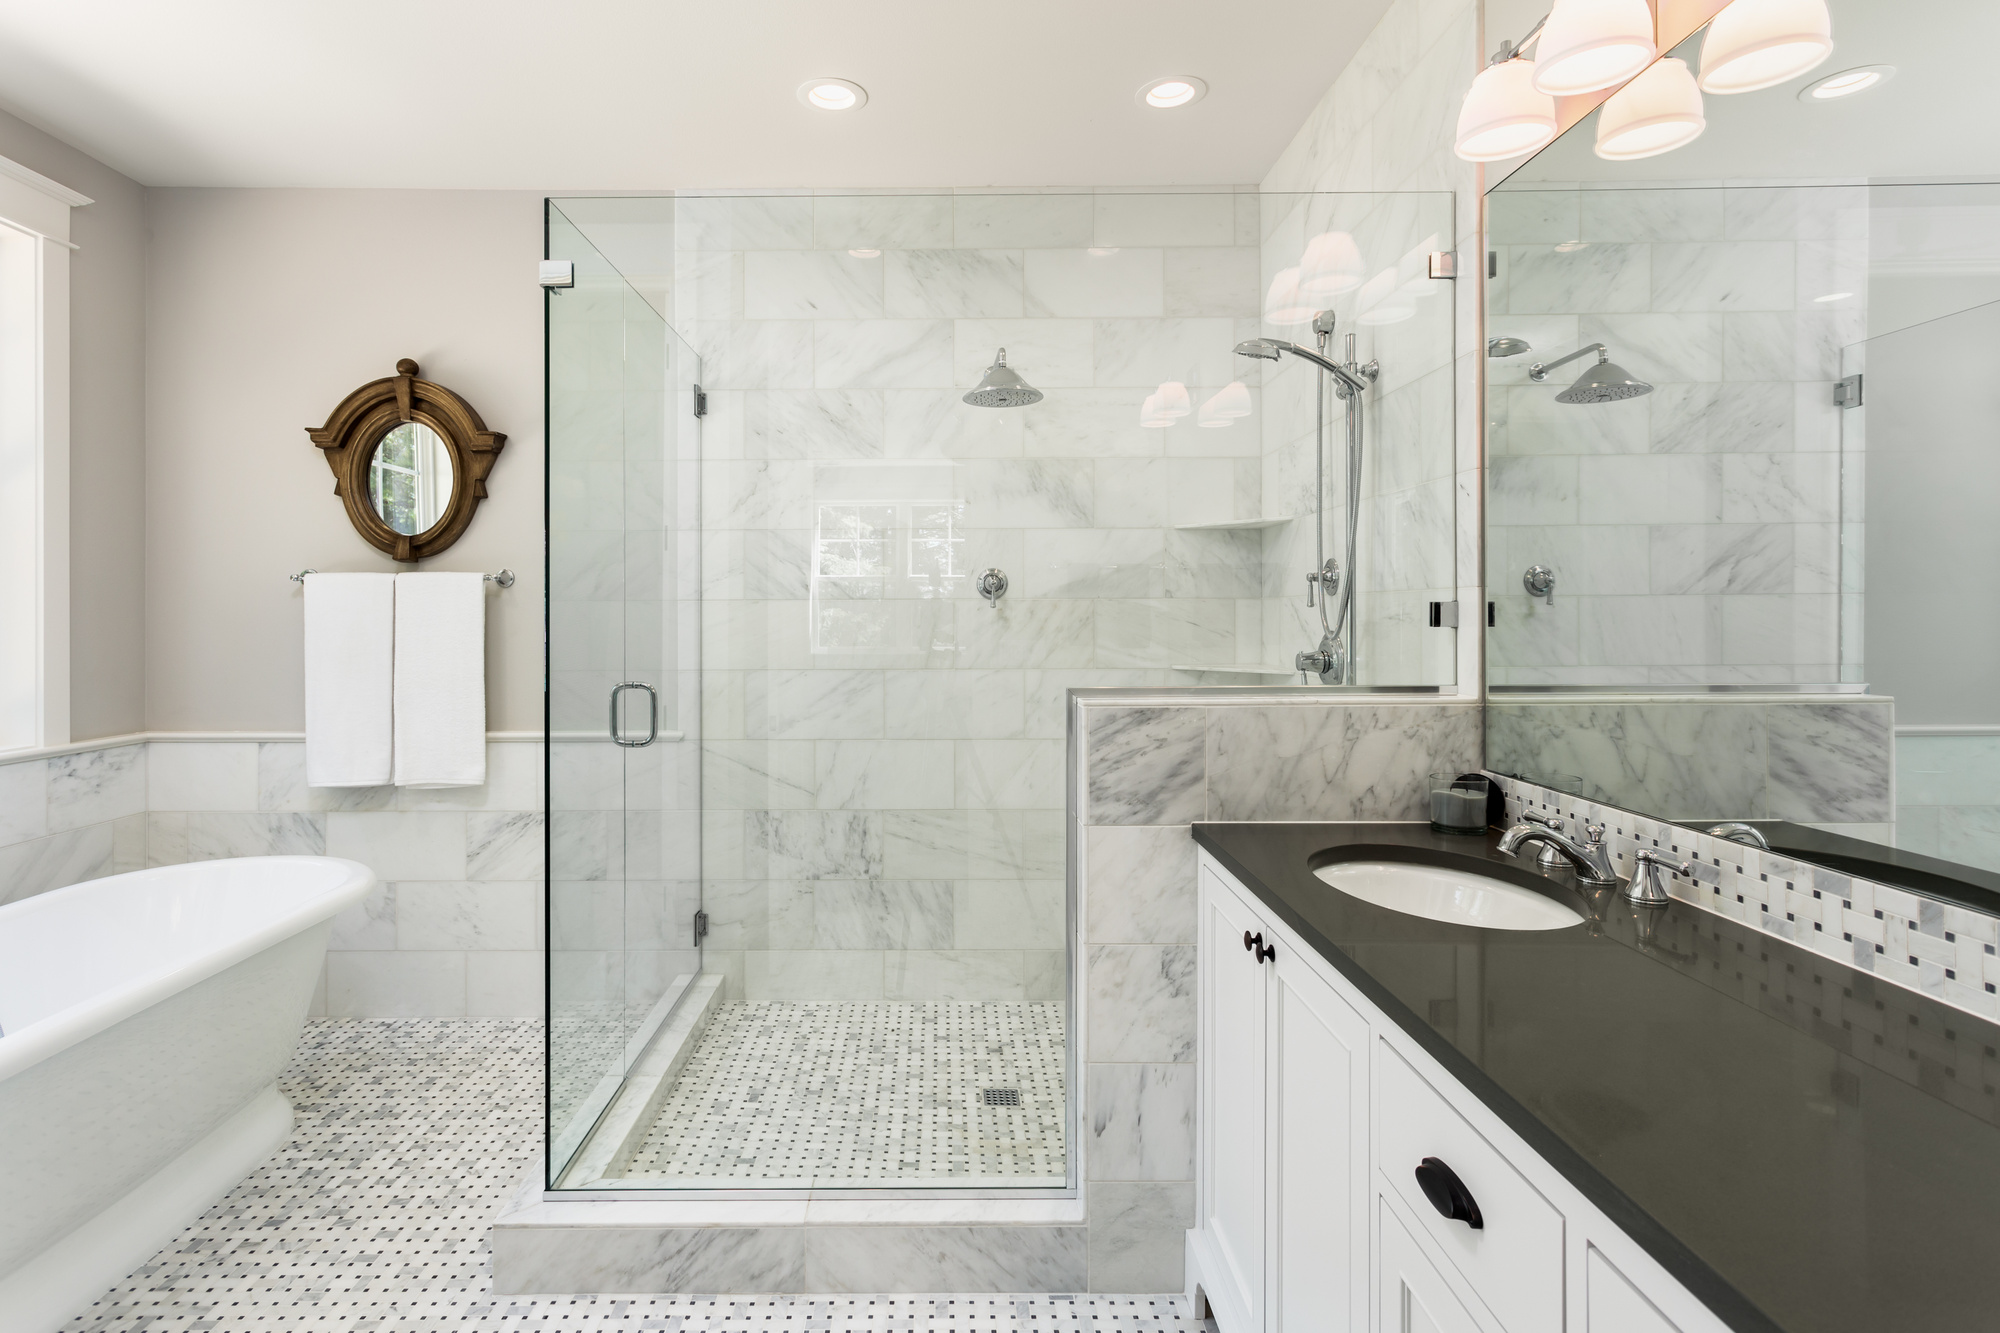 6 Simple Bathroom Updates to Do Before Selling Your Home